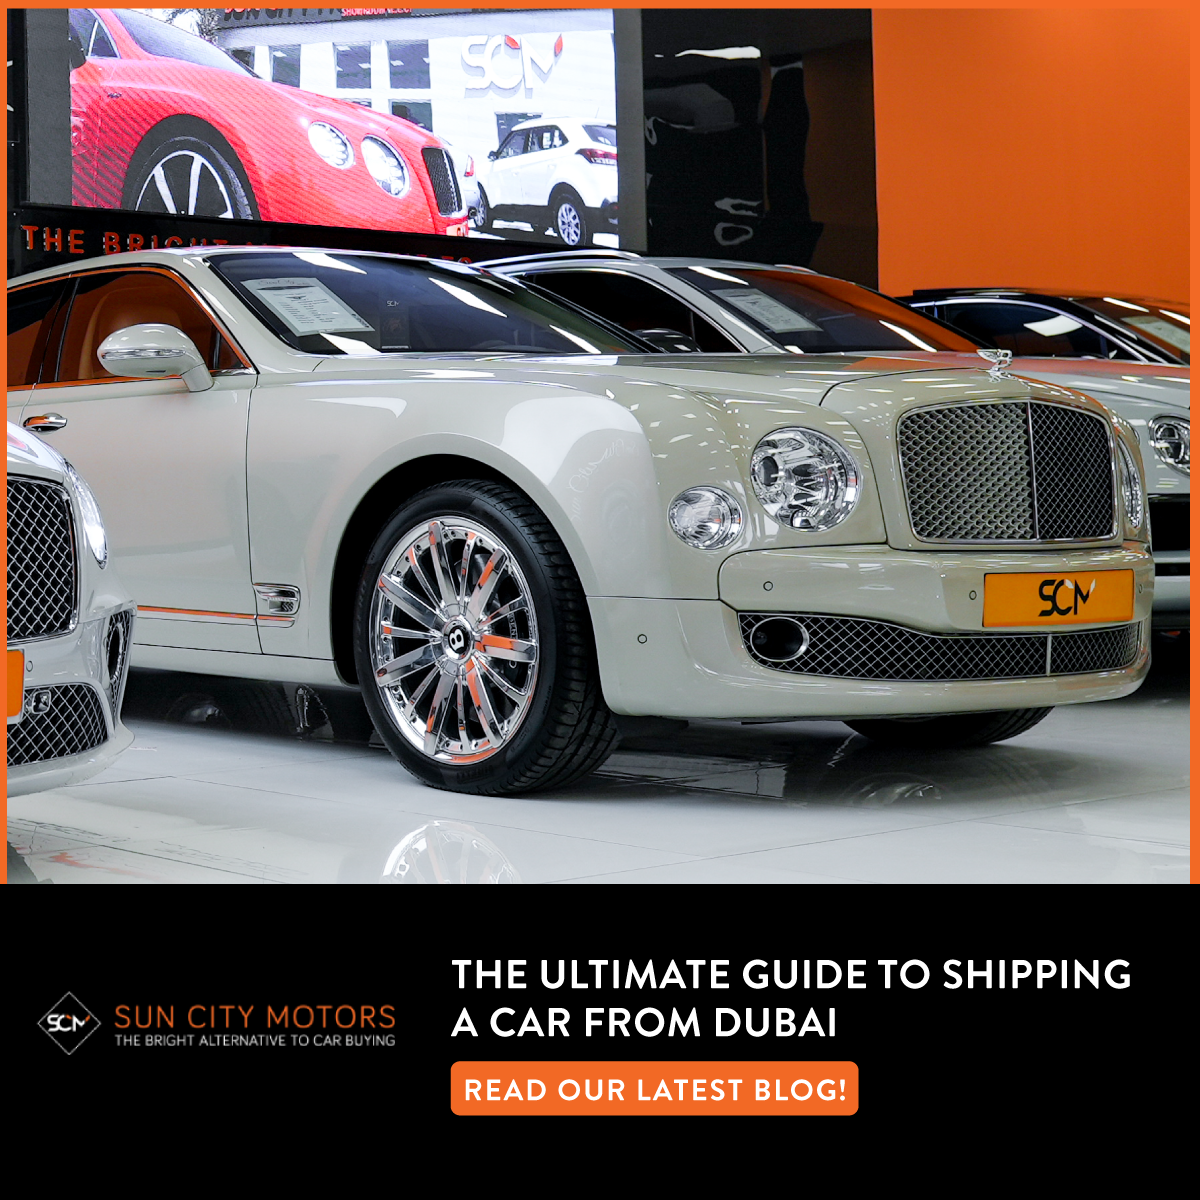 The Ultimate Guide To Shipping a Car From Dubai